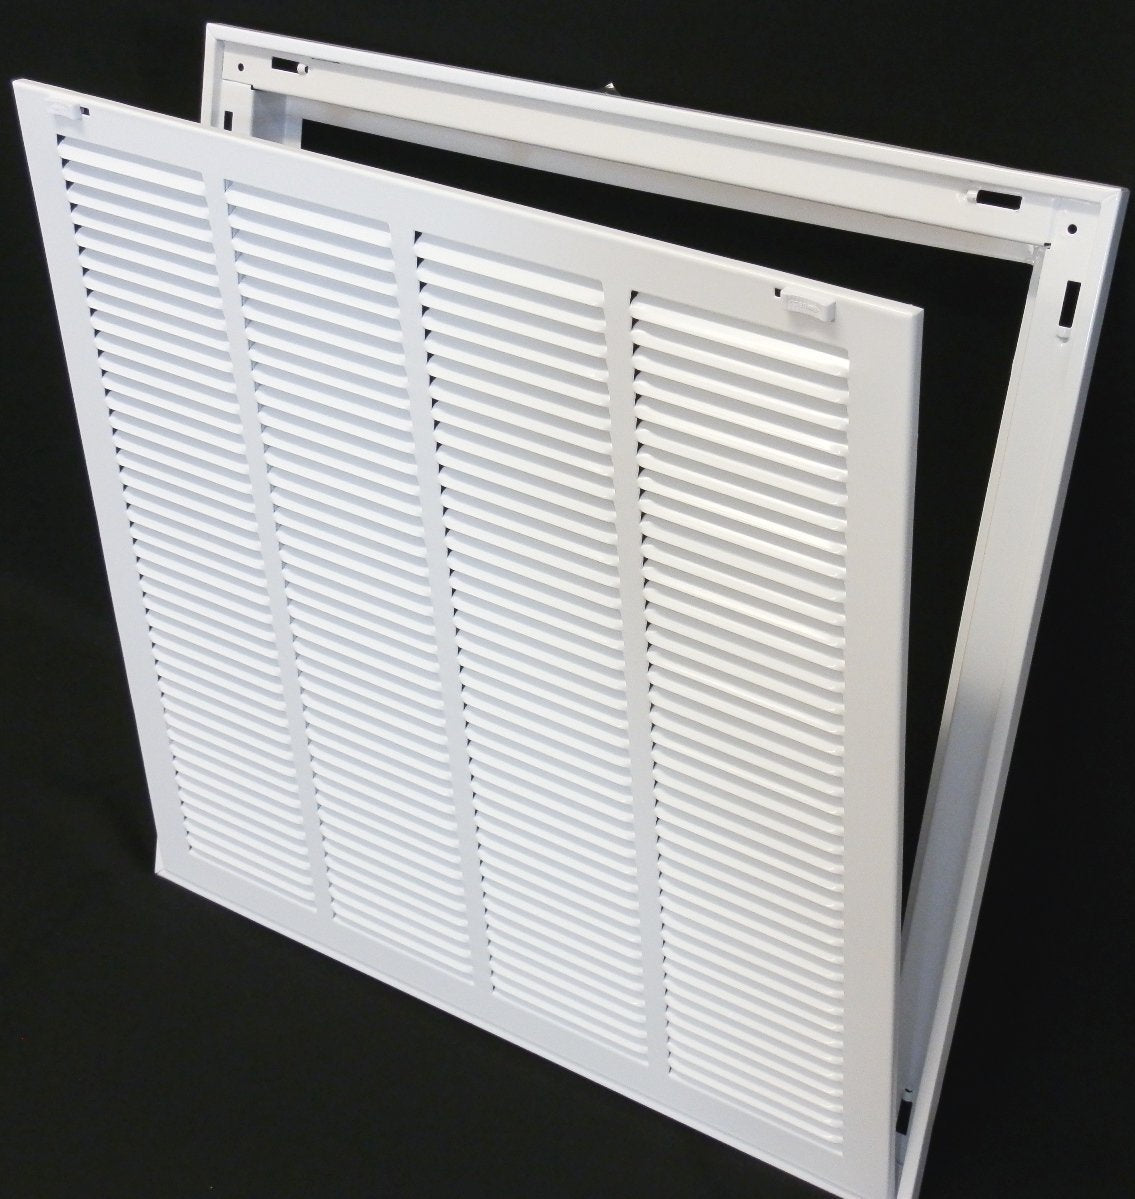 22&quot; X 30&quot; Steel Return Air Filter Grille for 1&quot; Filter - Removable Frame - [Outer Dimensions: 24 5/8&quot; X 32 5/8&quot;]